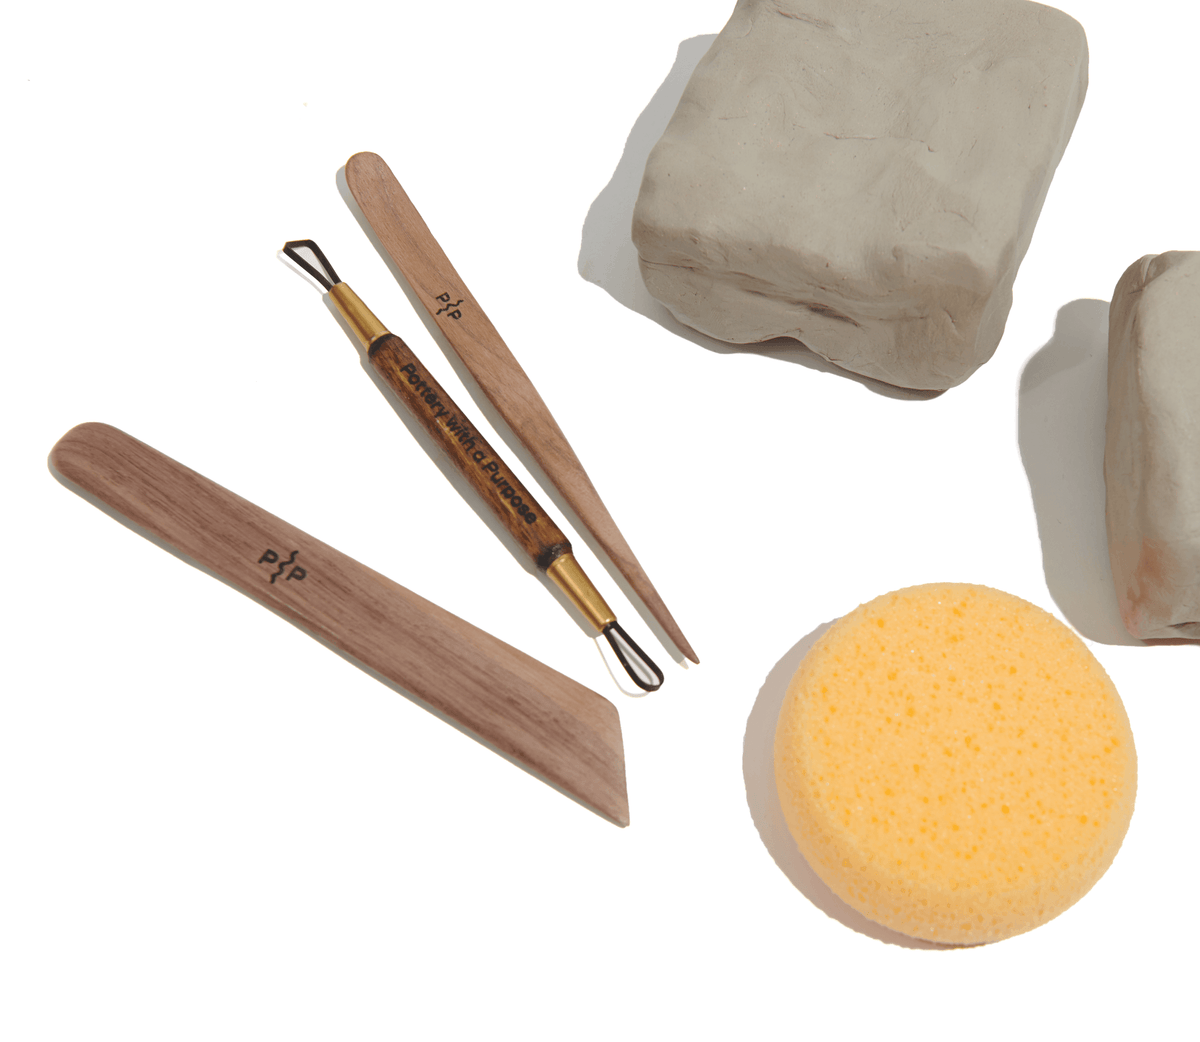 Beginner Pottery Kit – Ceramic - Pottery with a Purpose